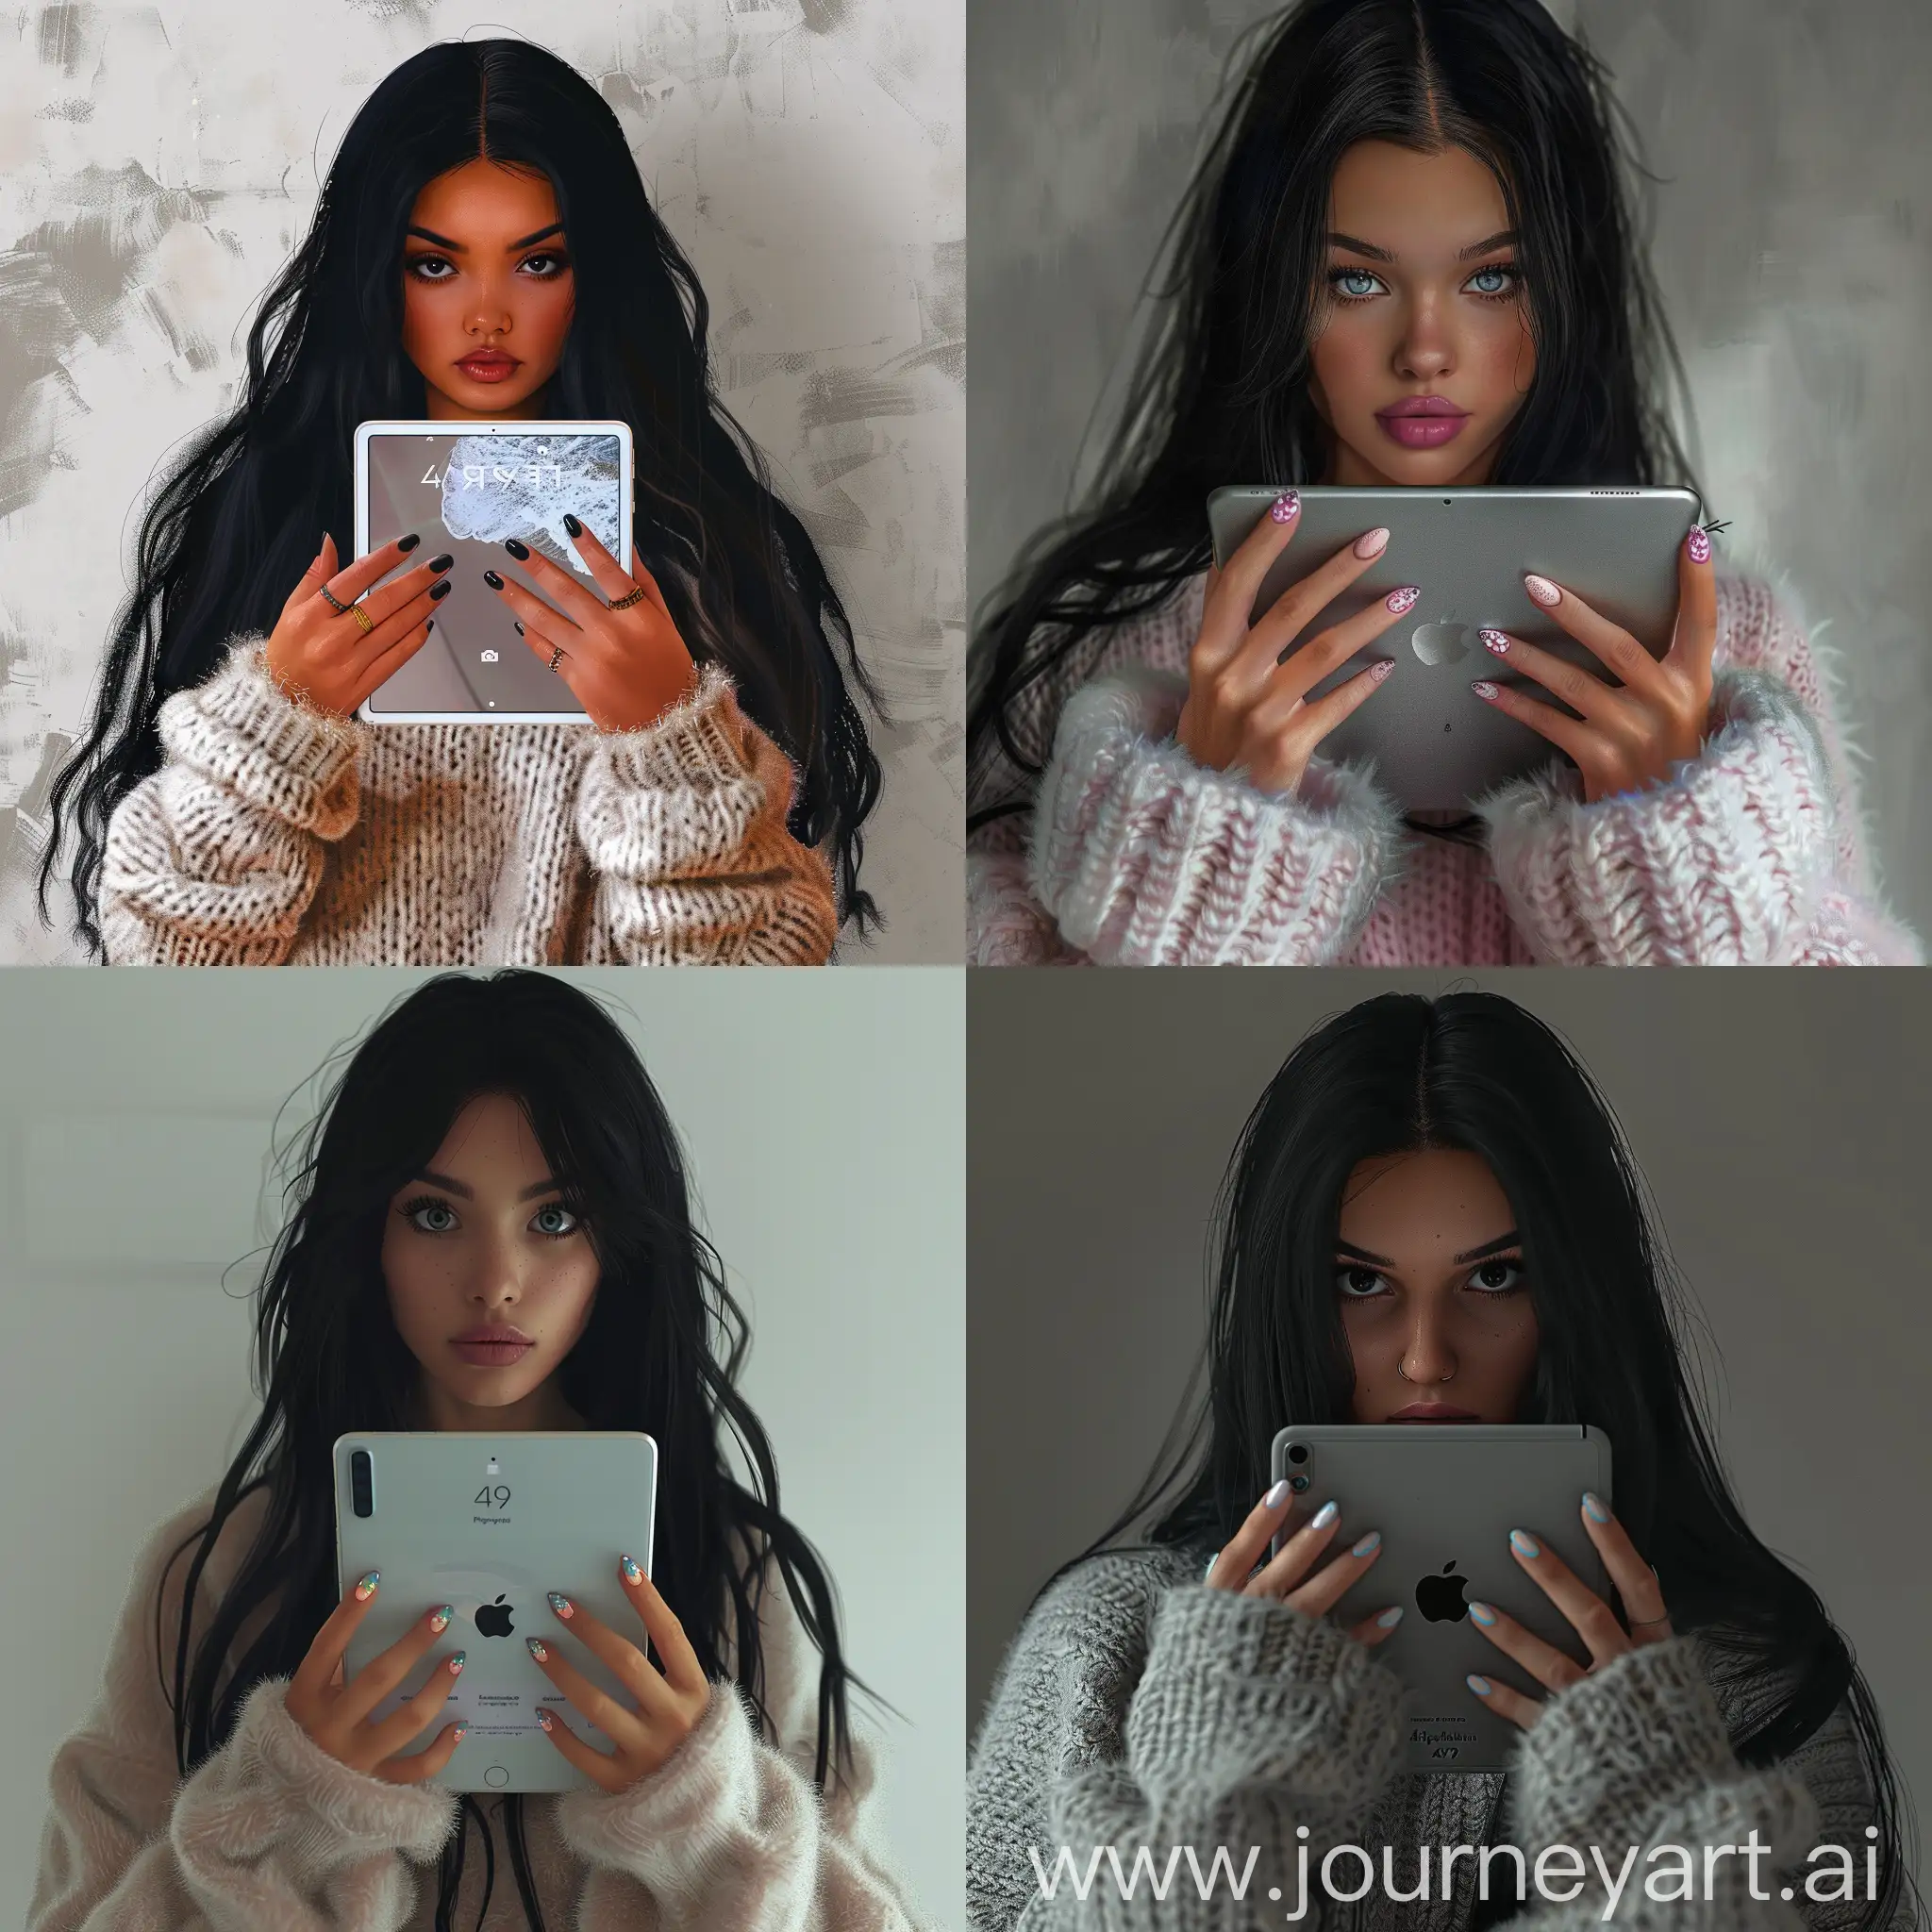 A girl with long black hair, beautiful nails, shares iPad 9 in her hands and looks forward, photorealism, soft plush sweater, 4:5